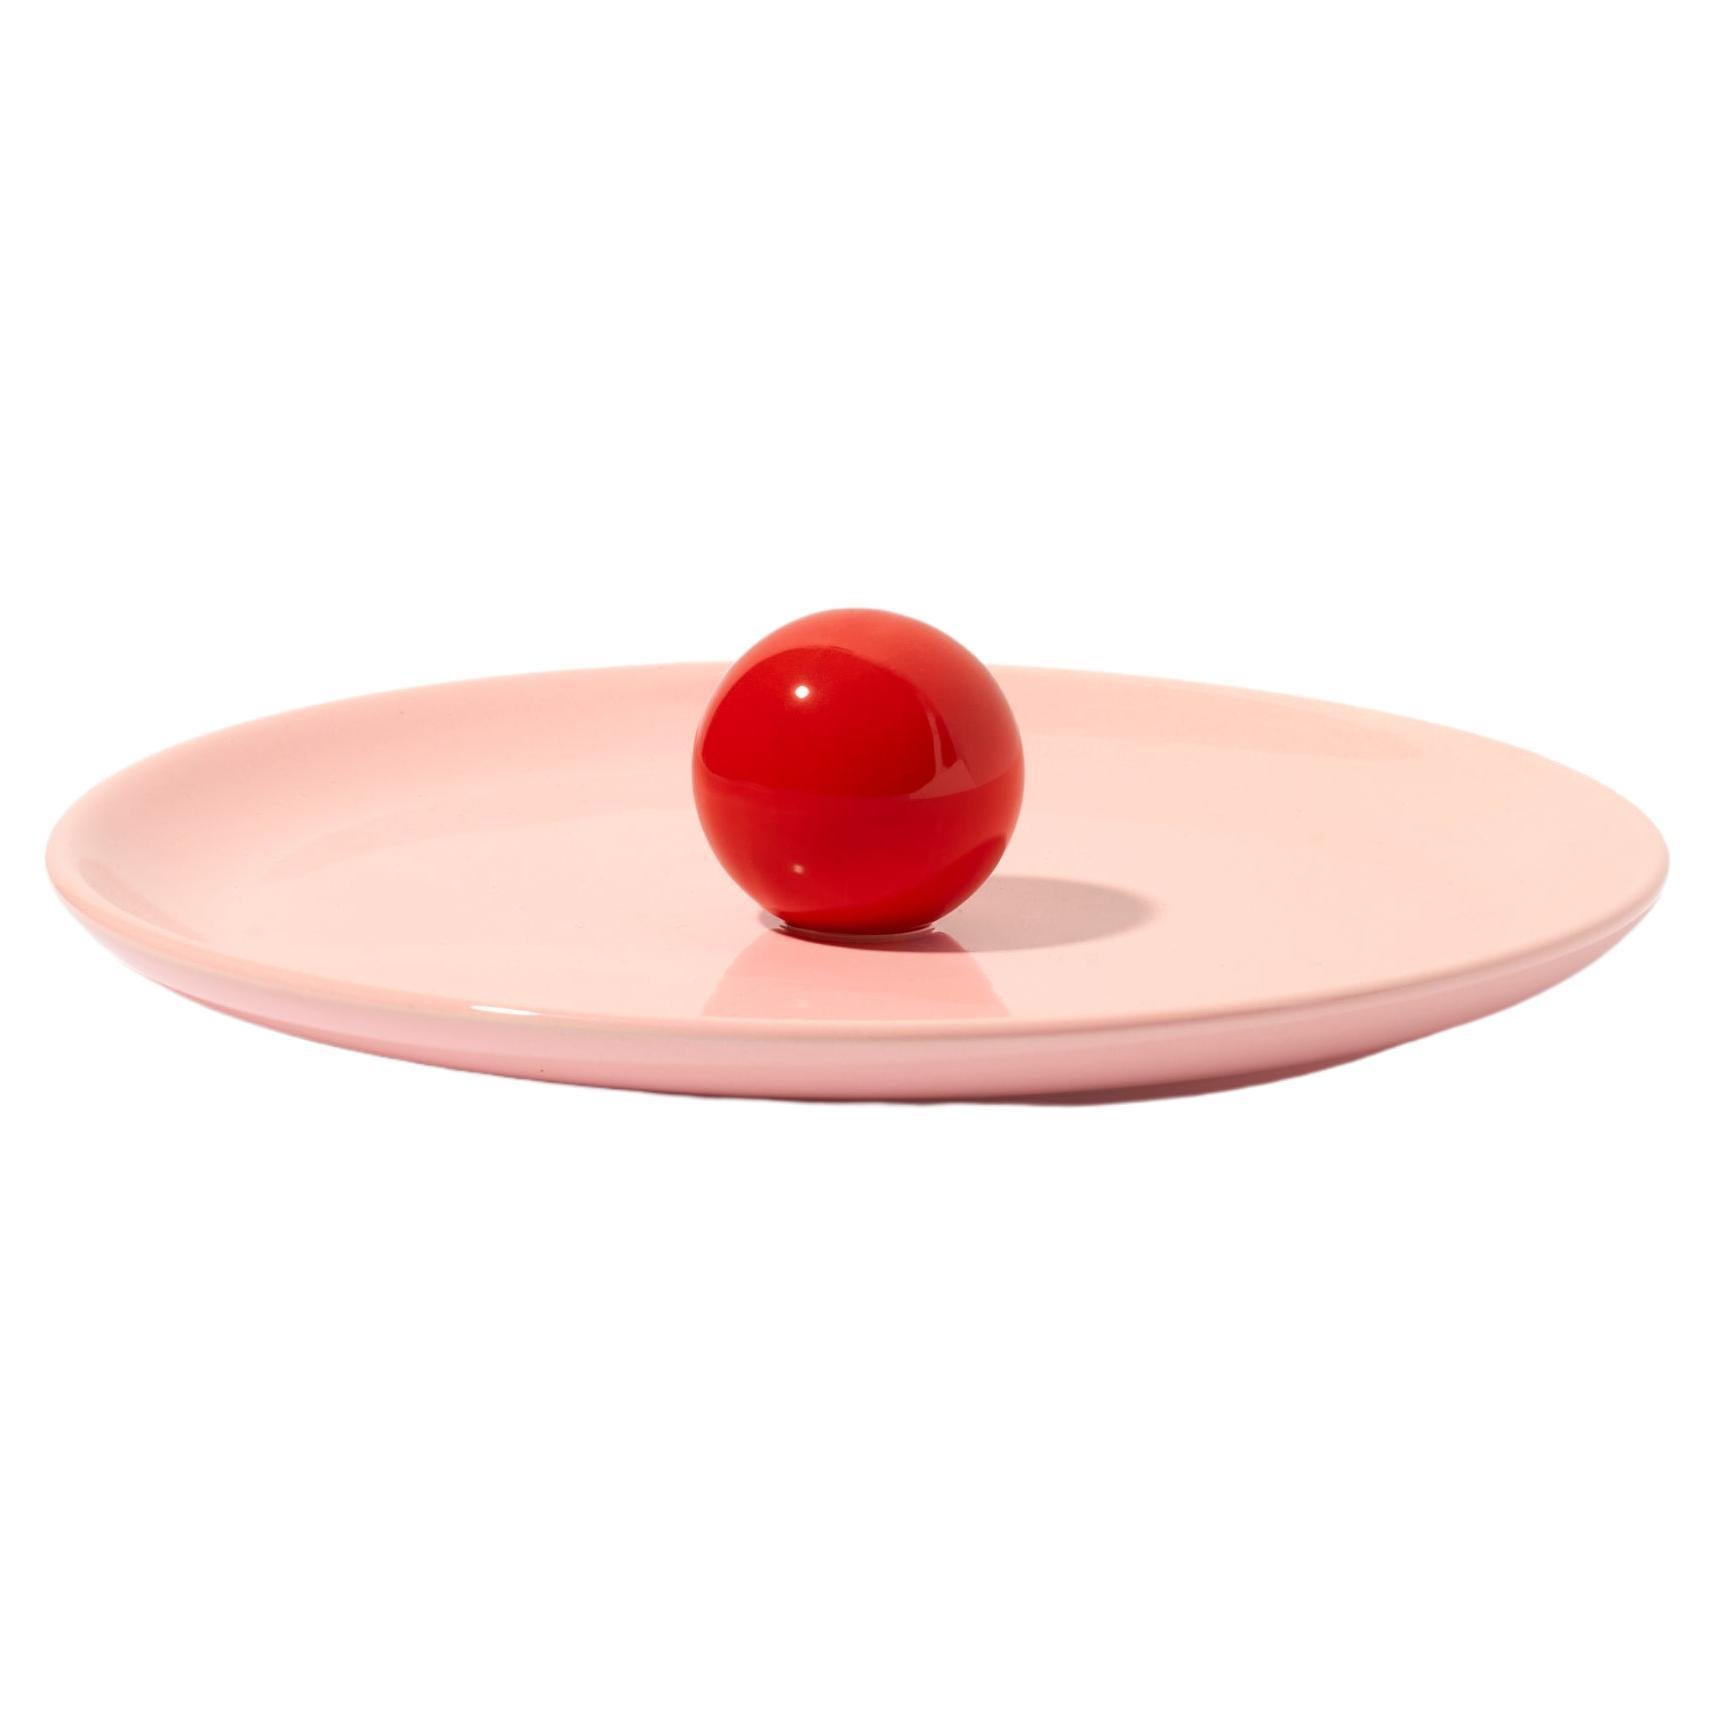 Aniela Platter / Circus / Candy / Red by Malwina Konopacka For Sale